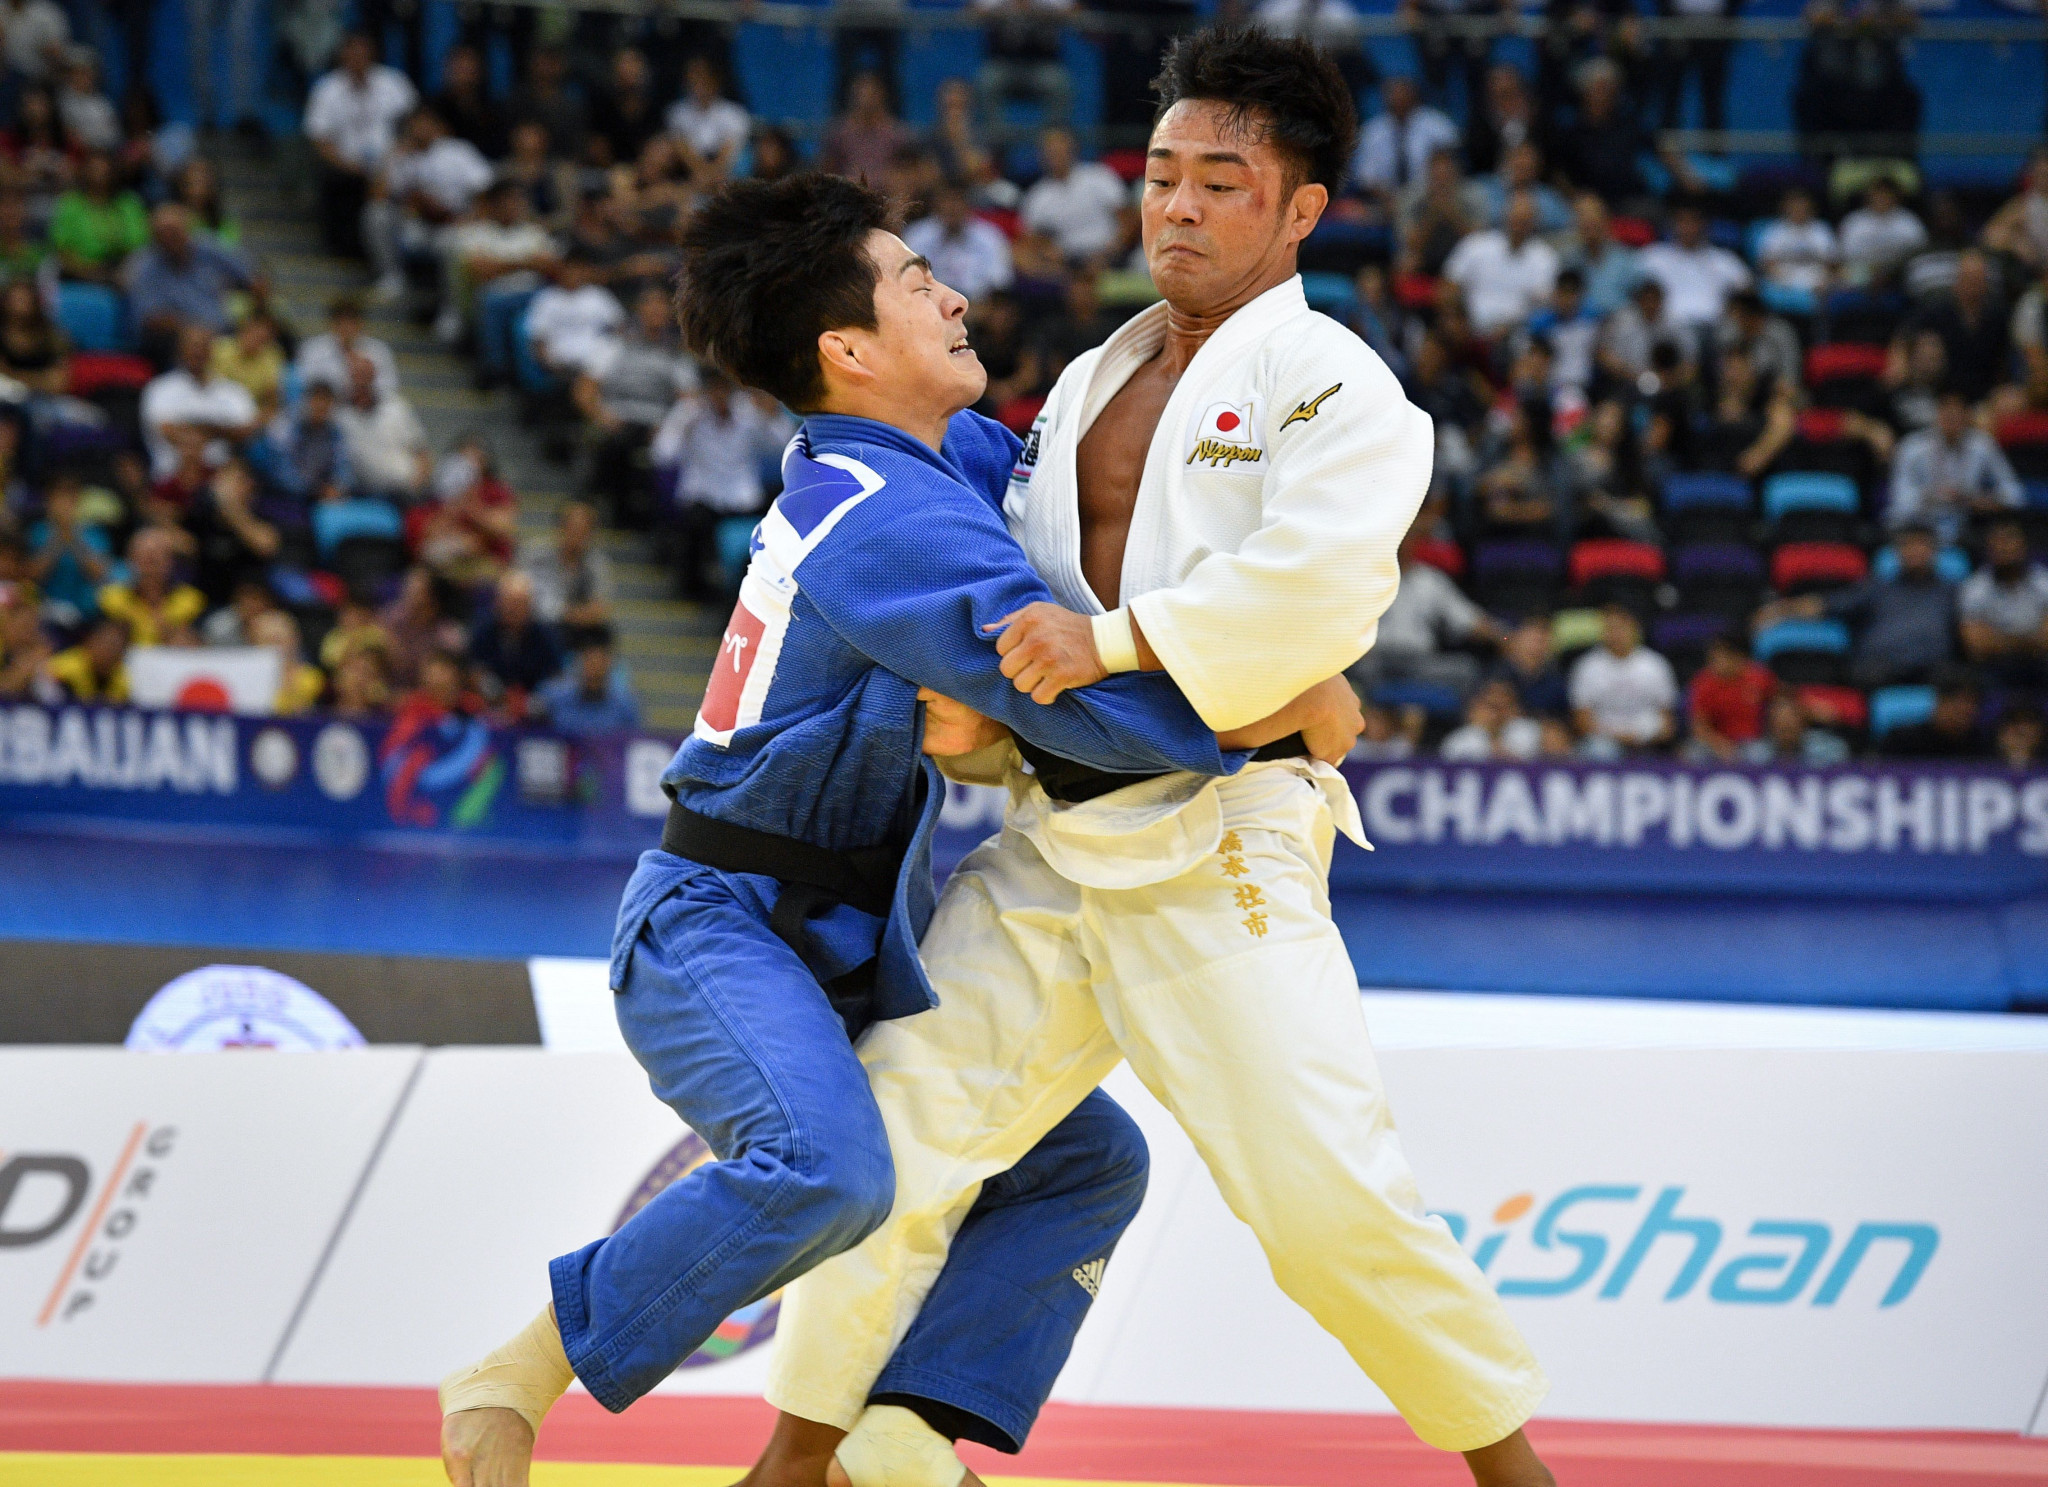 Two new champions crowned on day three of IJF World Championships